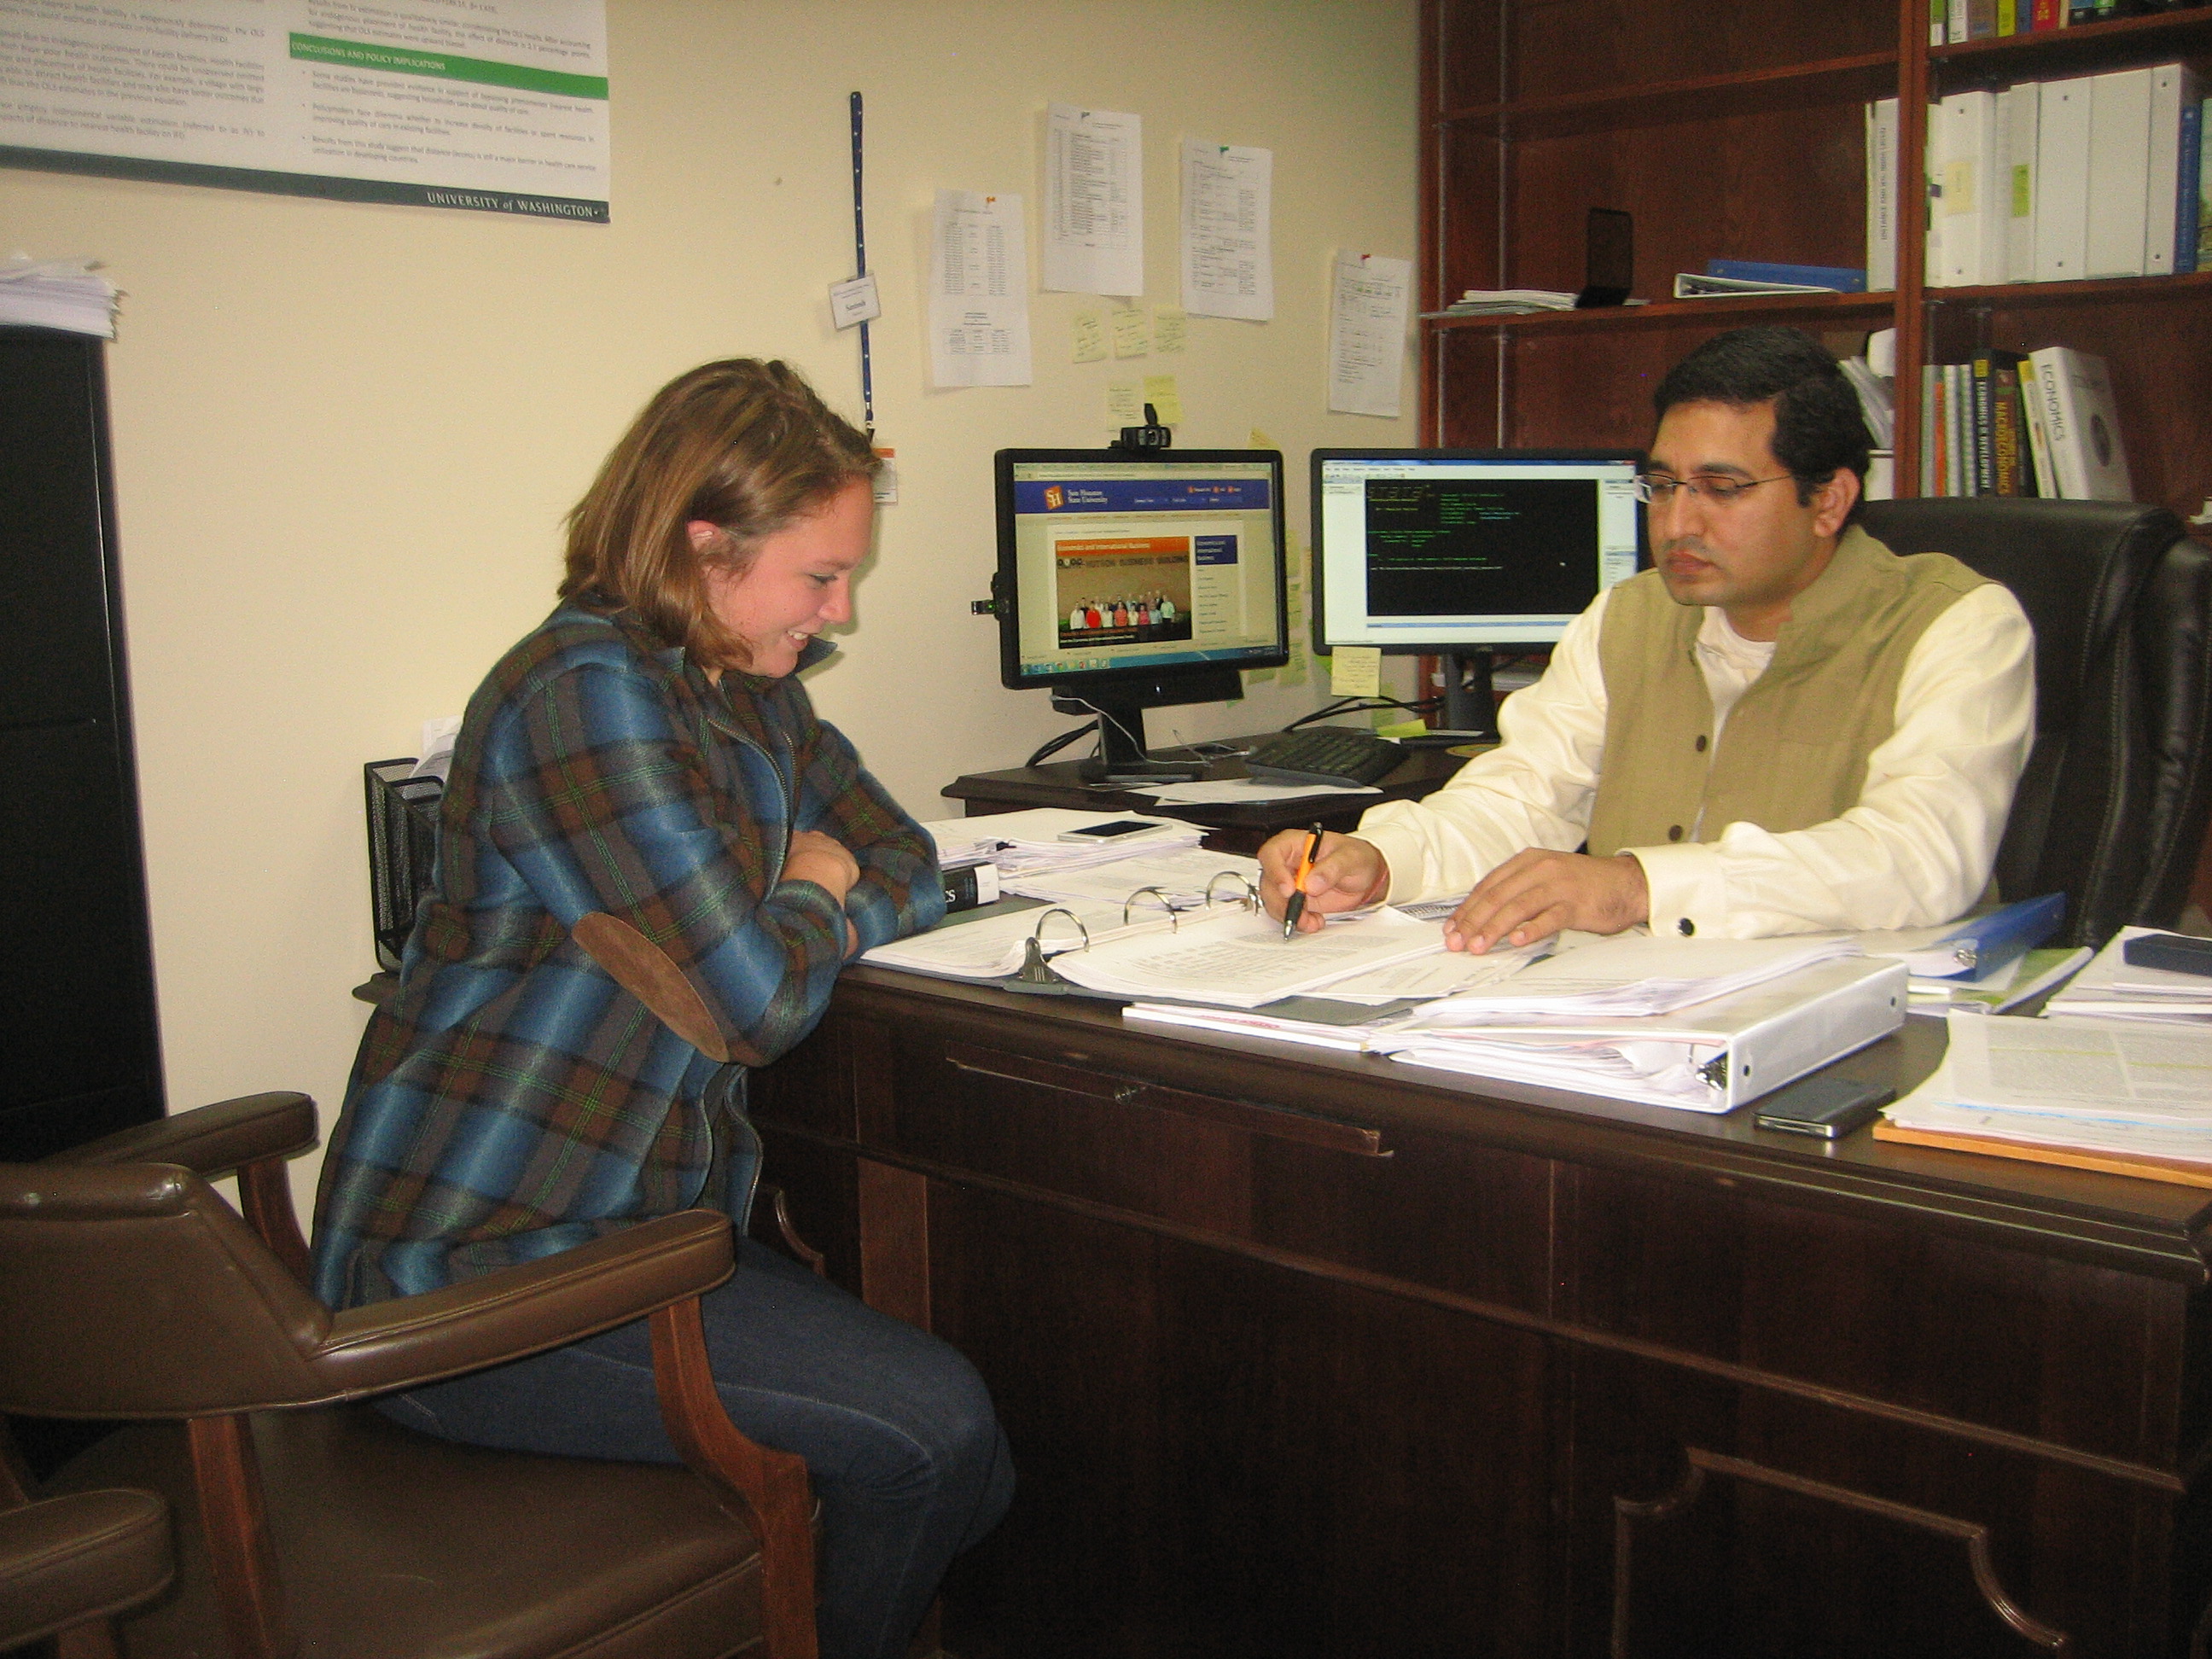 Santosh Kumar and his undergraduate student madison becker work on research together.